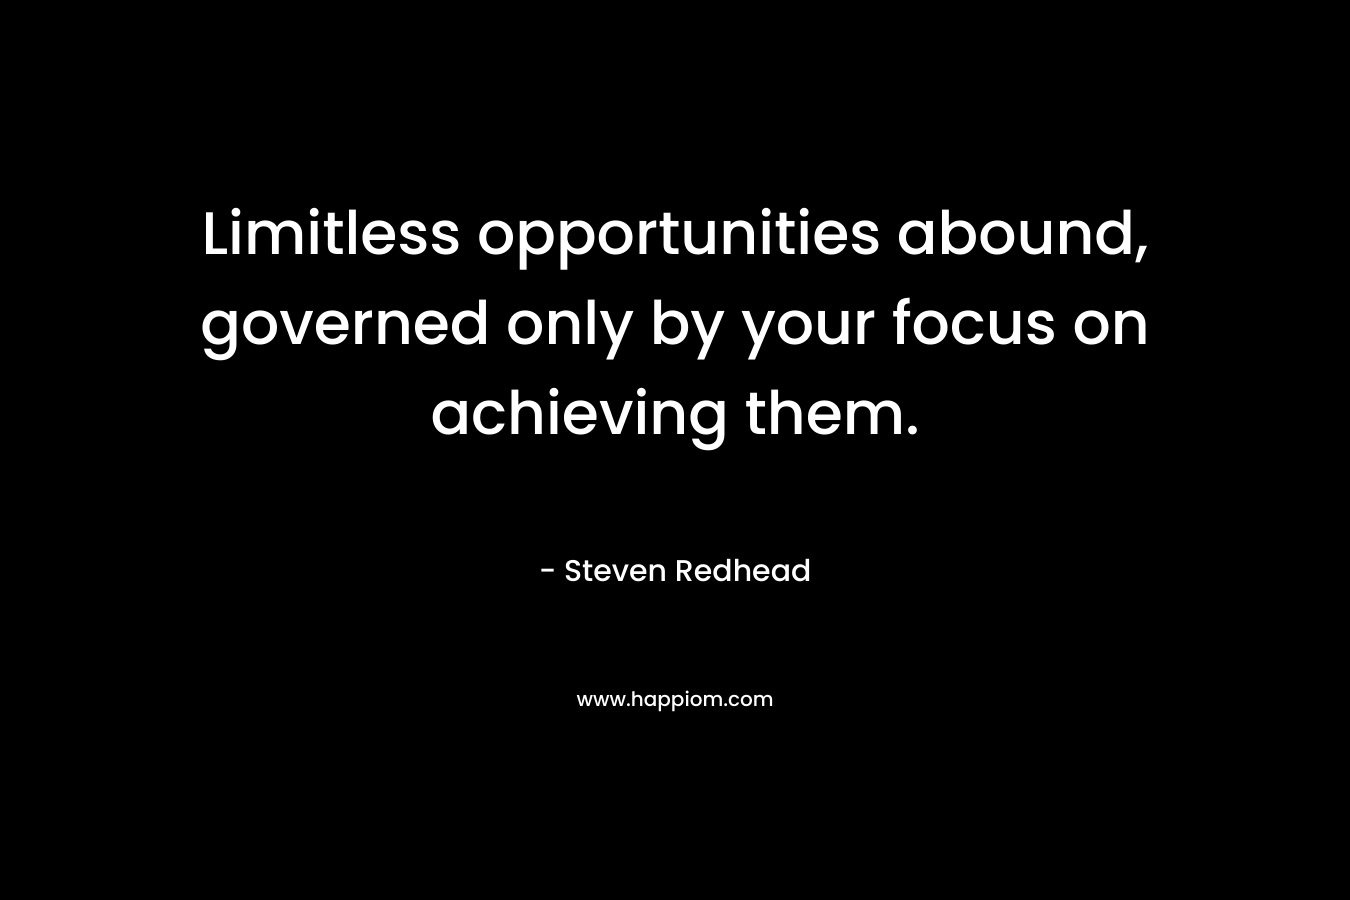 Limitless opportunities abound, governed only by your focus on achieving them.